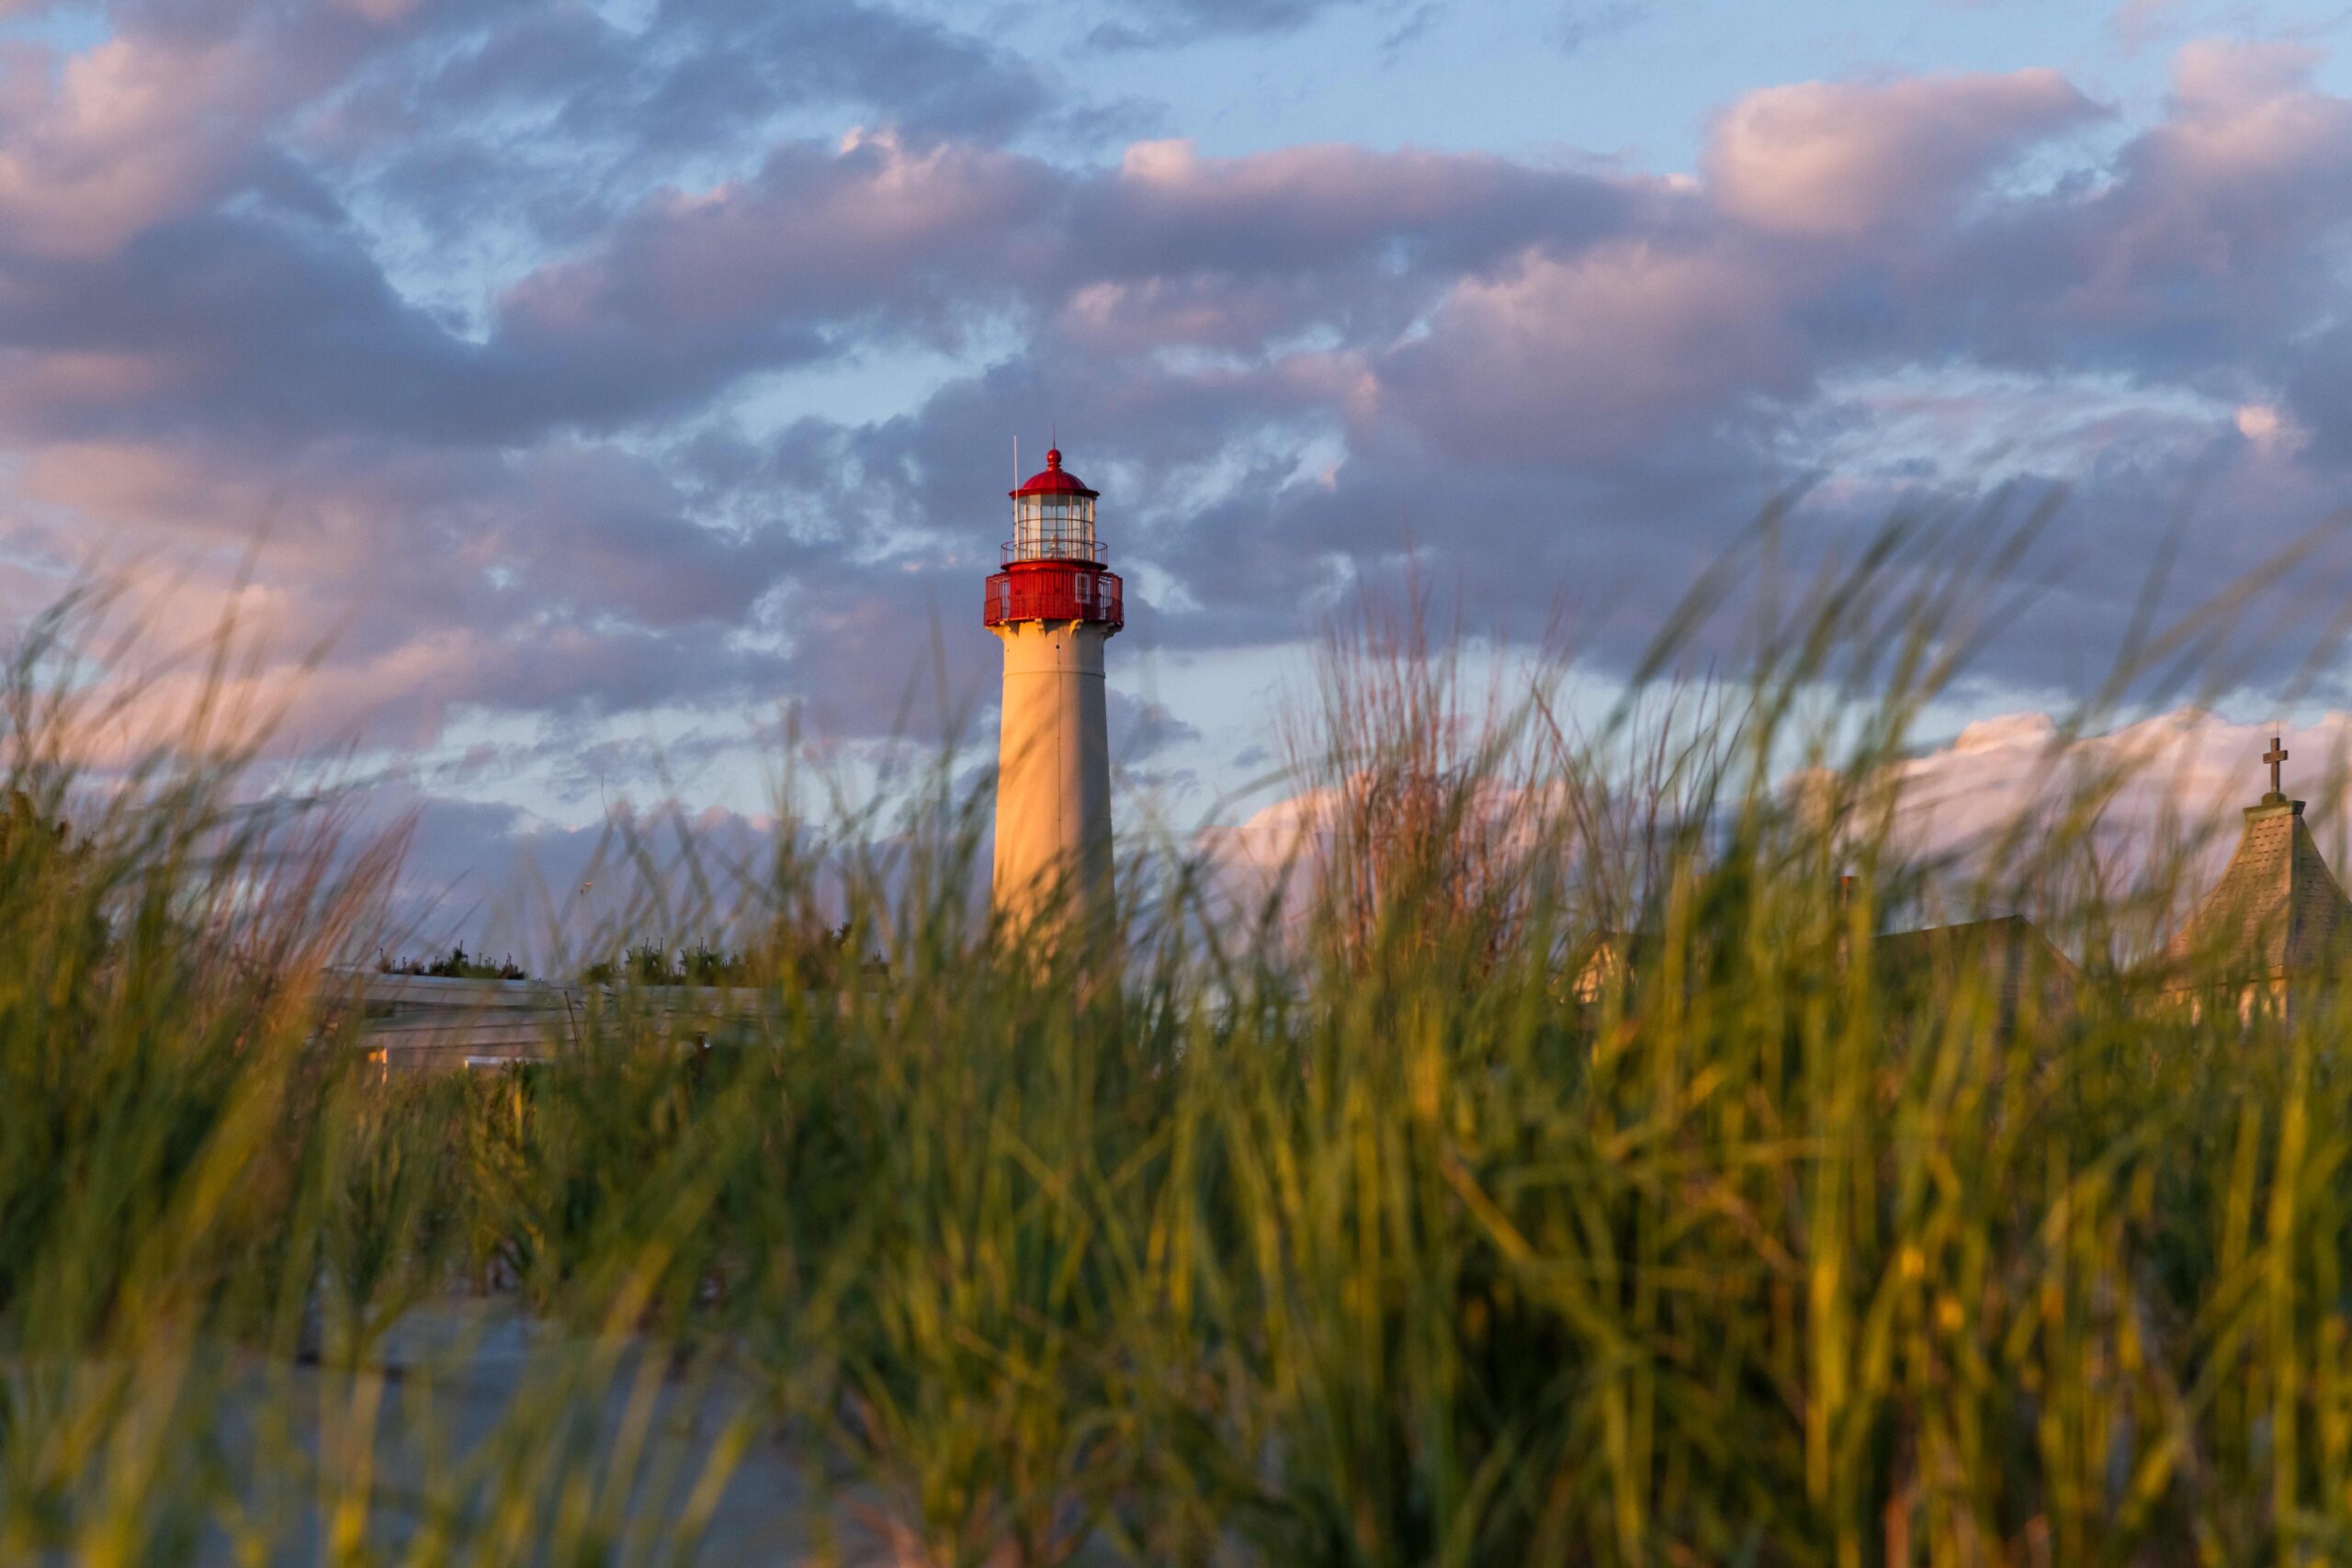 Sunset light shining on the Cape May lighthouse with purple and pink clouds in the sky and green beach dunes in the foreground